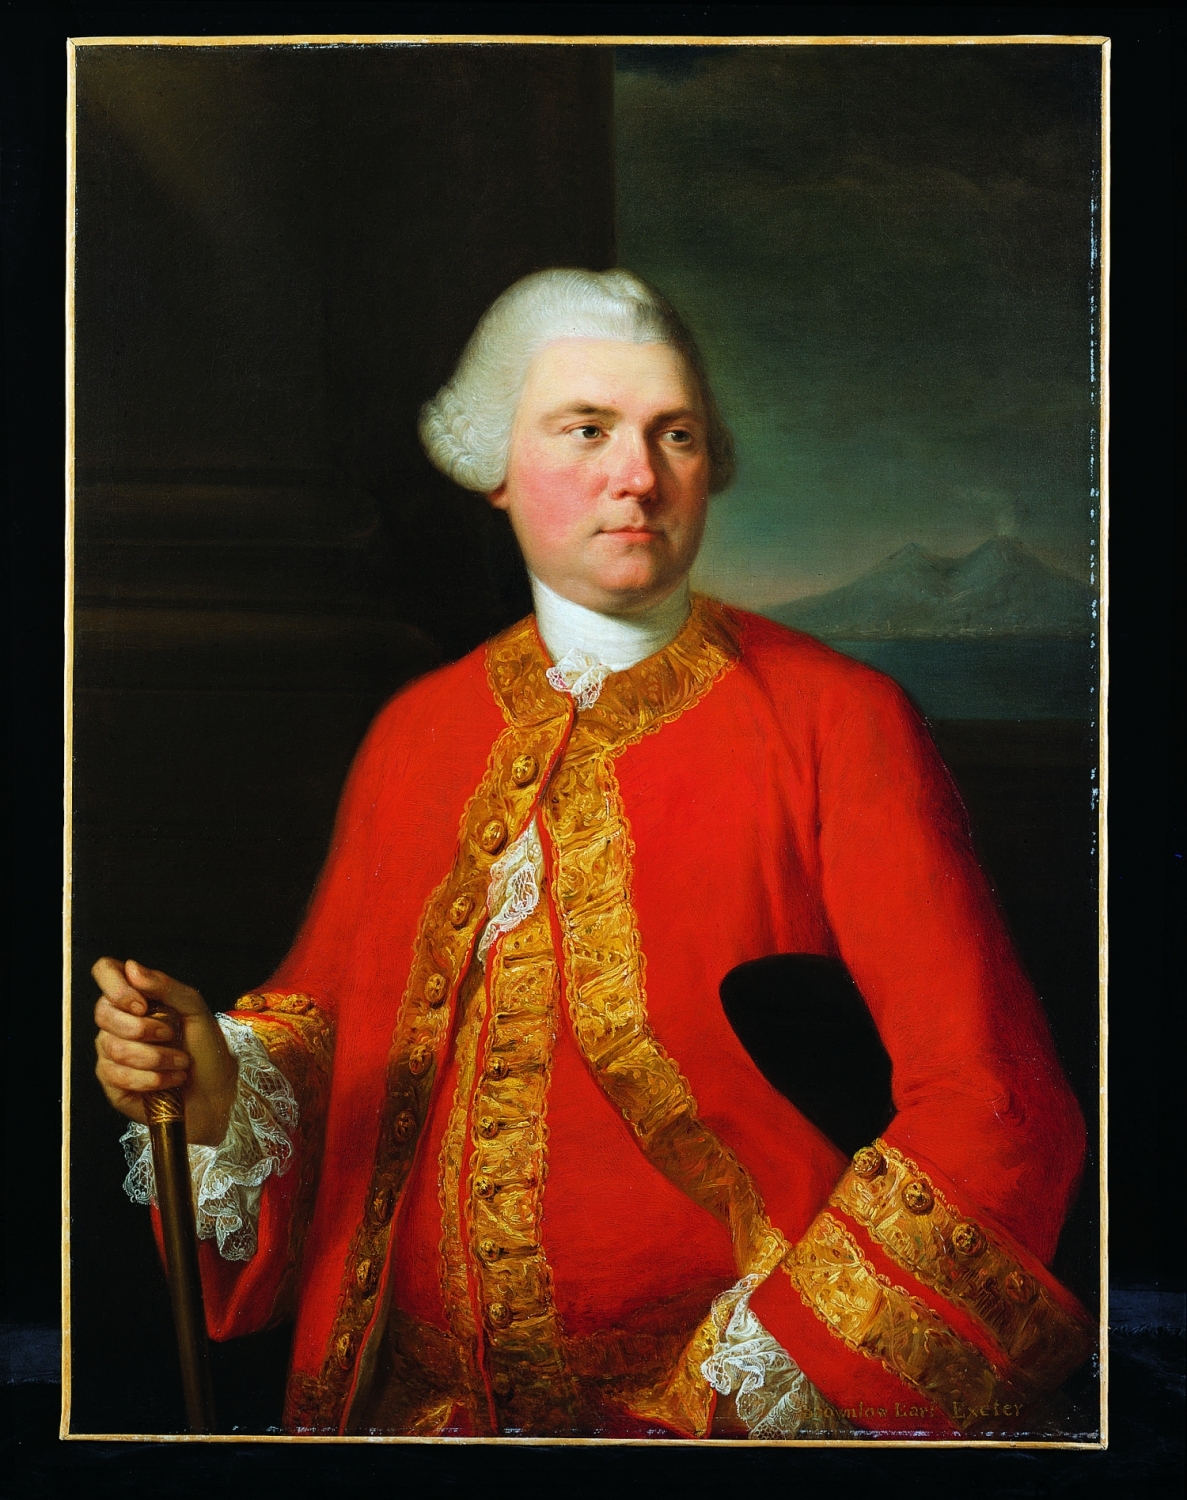 Brownlow, 9th Earl of Exeter